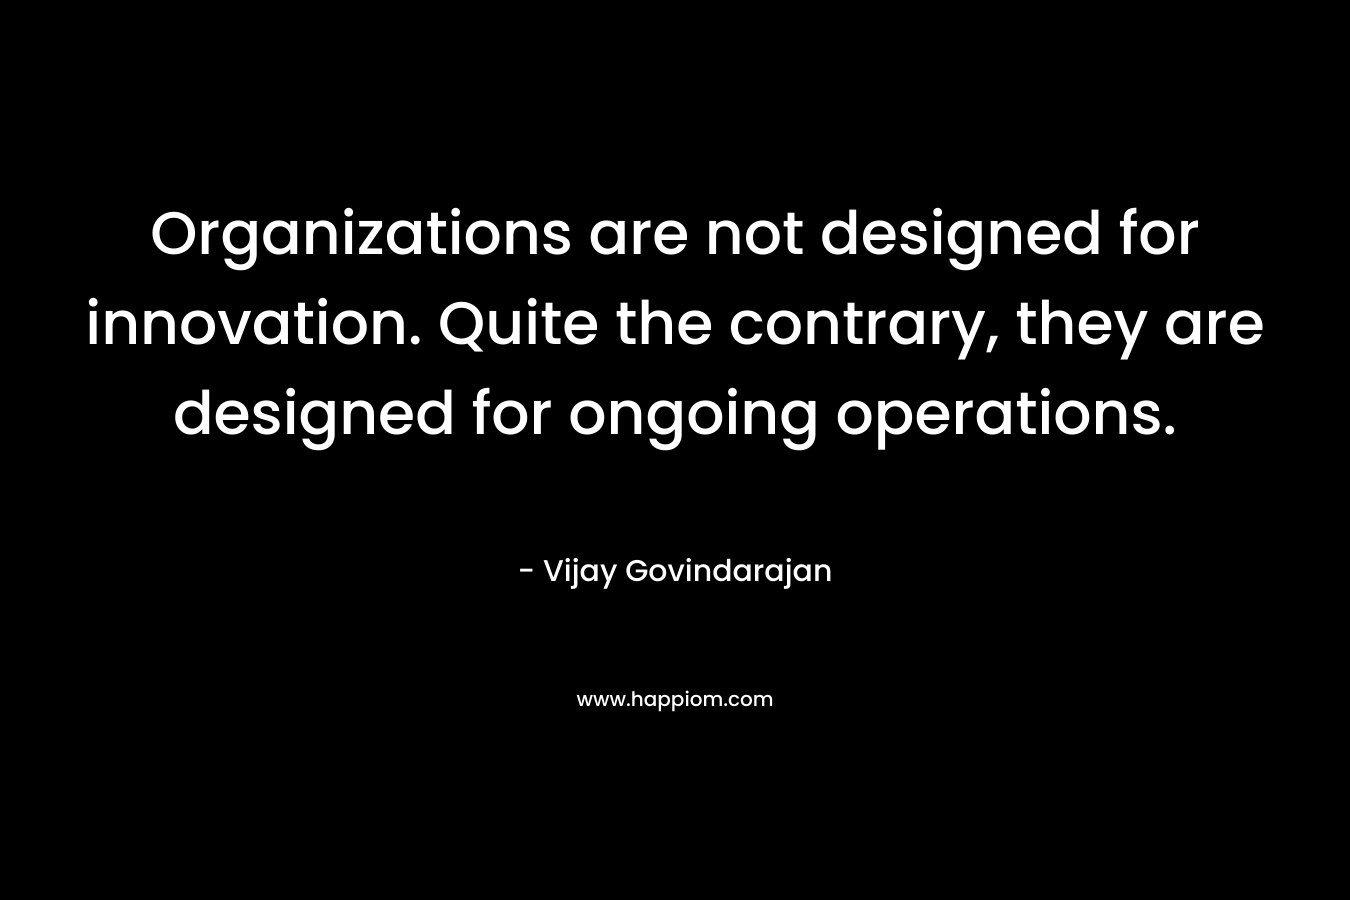 Organizations are not designed for innovation. Quite the contrary, they are designed for ongoing operations. – Vijay Govindarajan